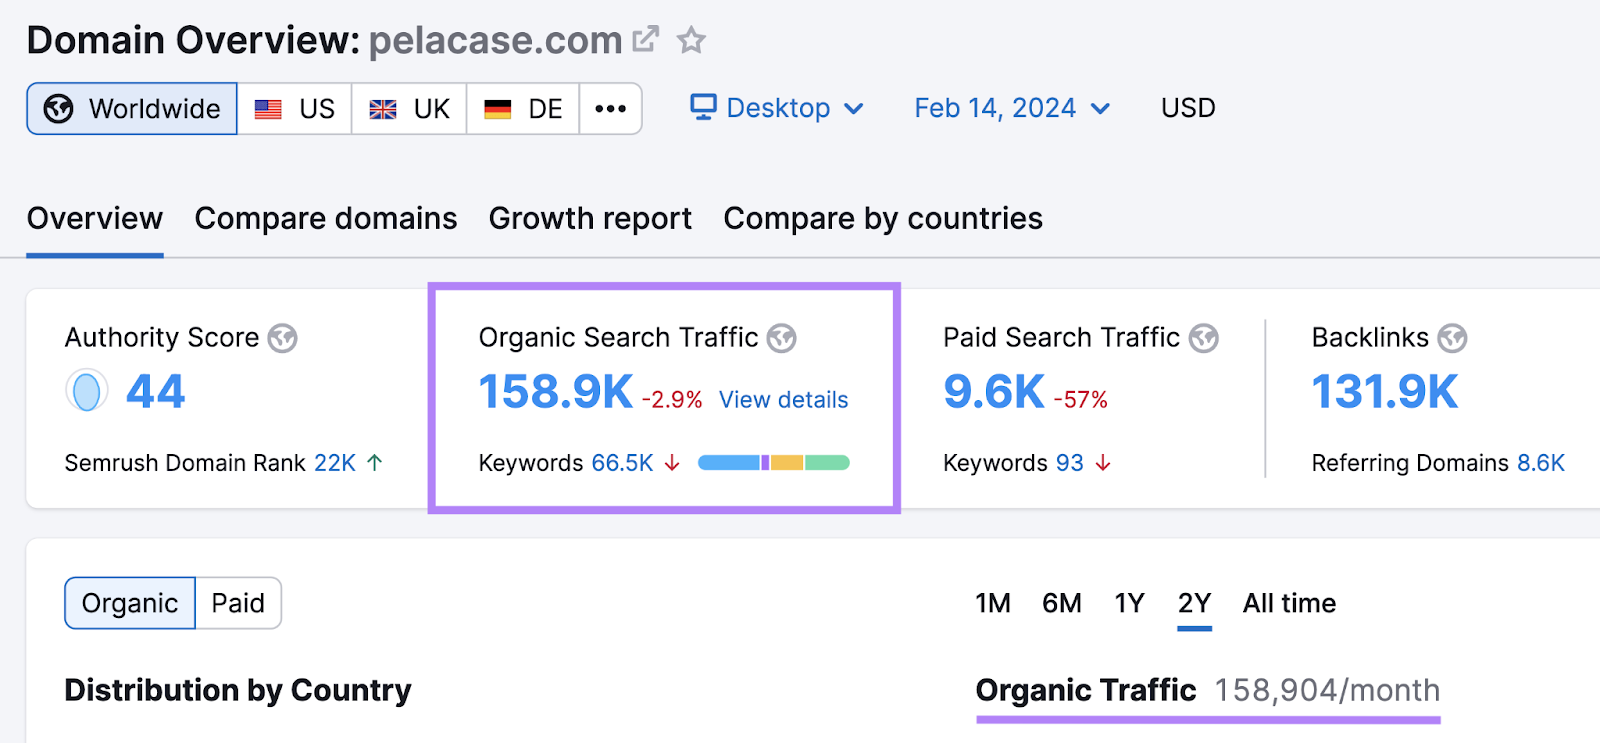 "Organic Search Traffic" widget in Domain Overview tool shows 158.9K visits per month for "pelacase.com"